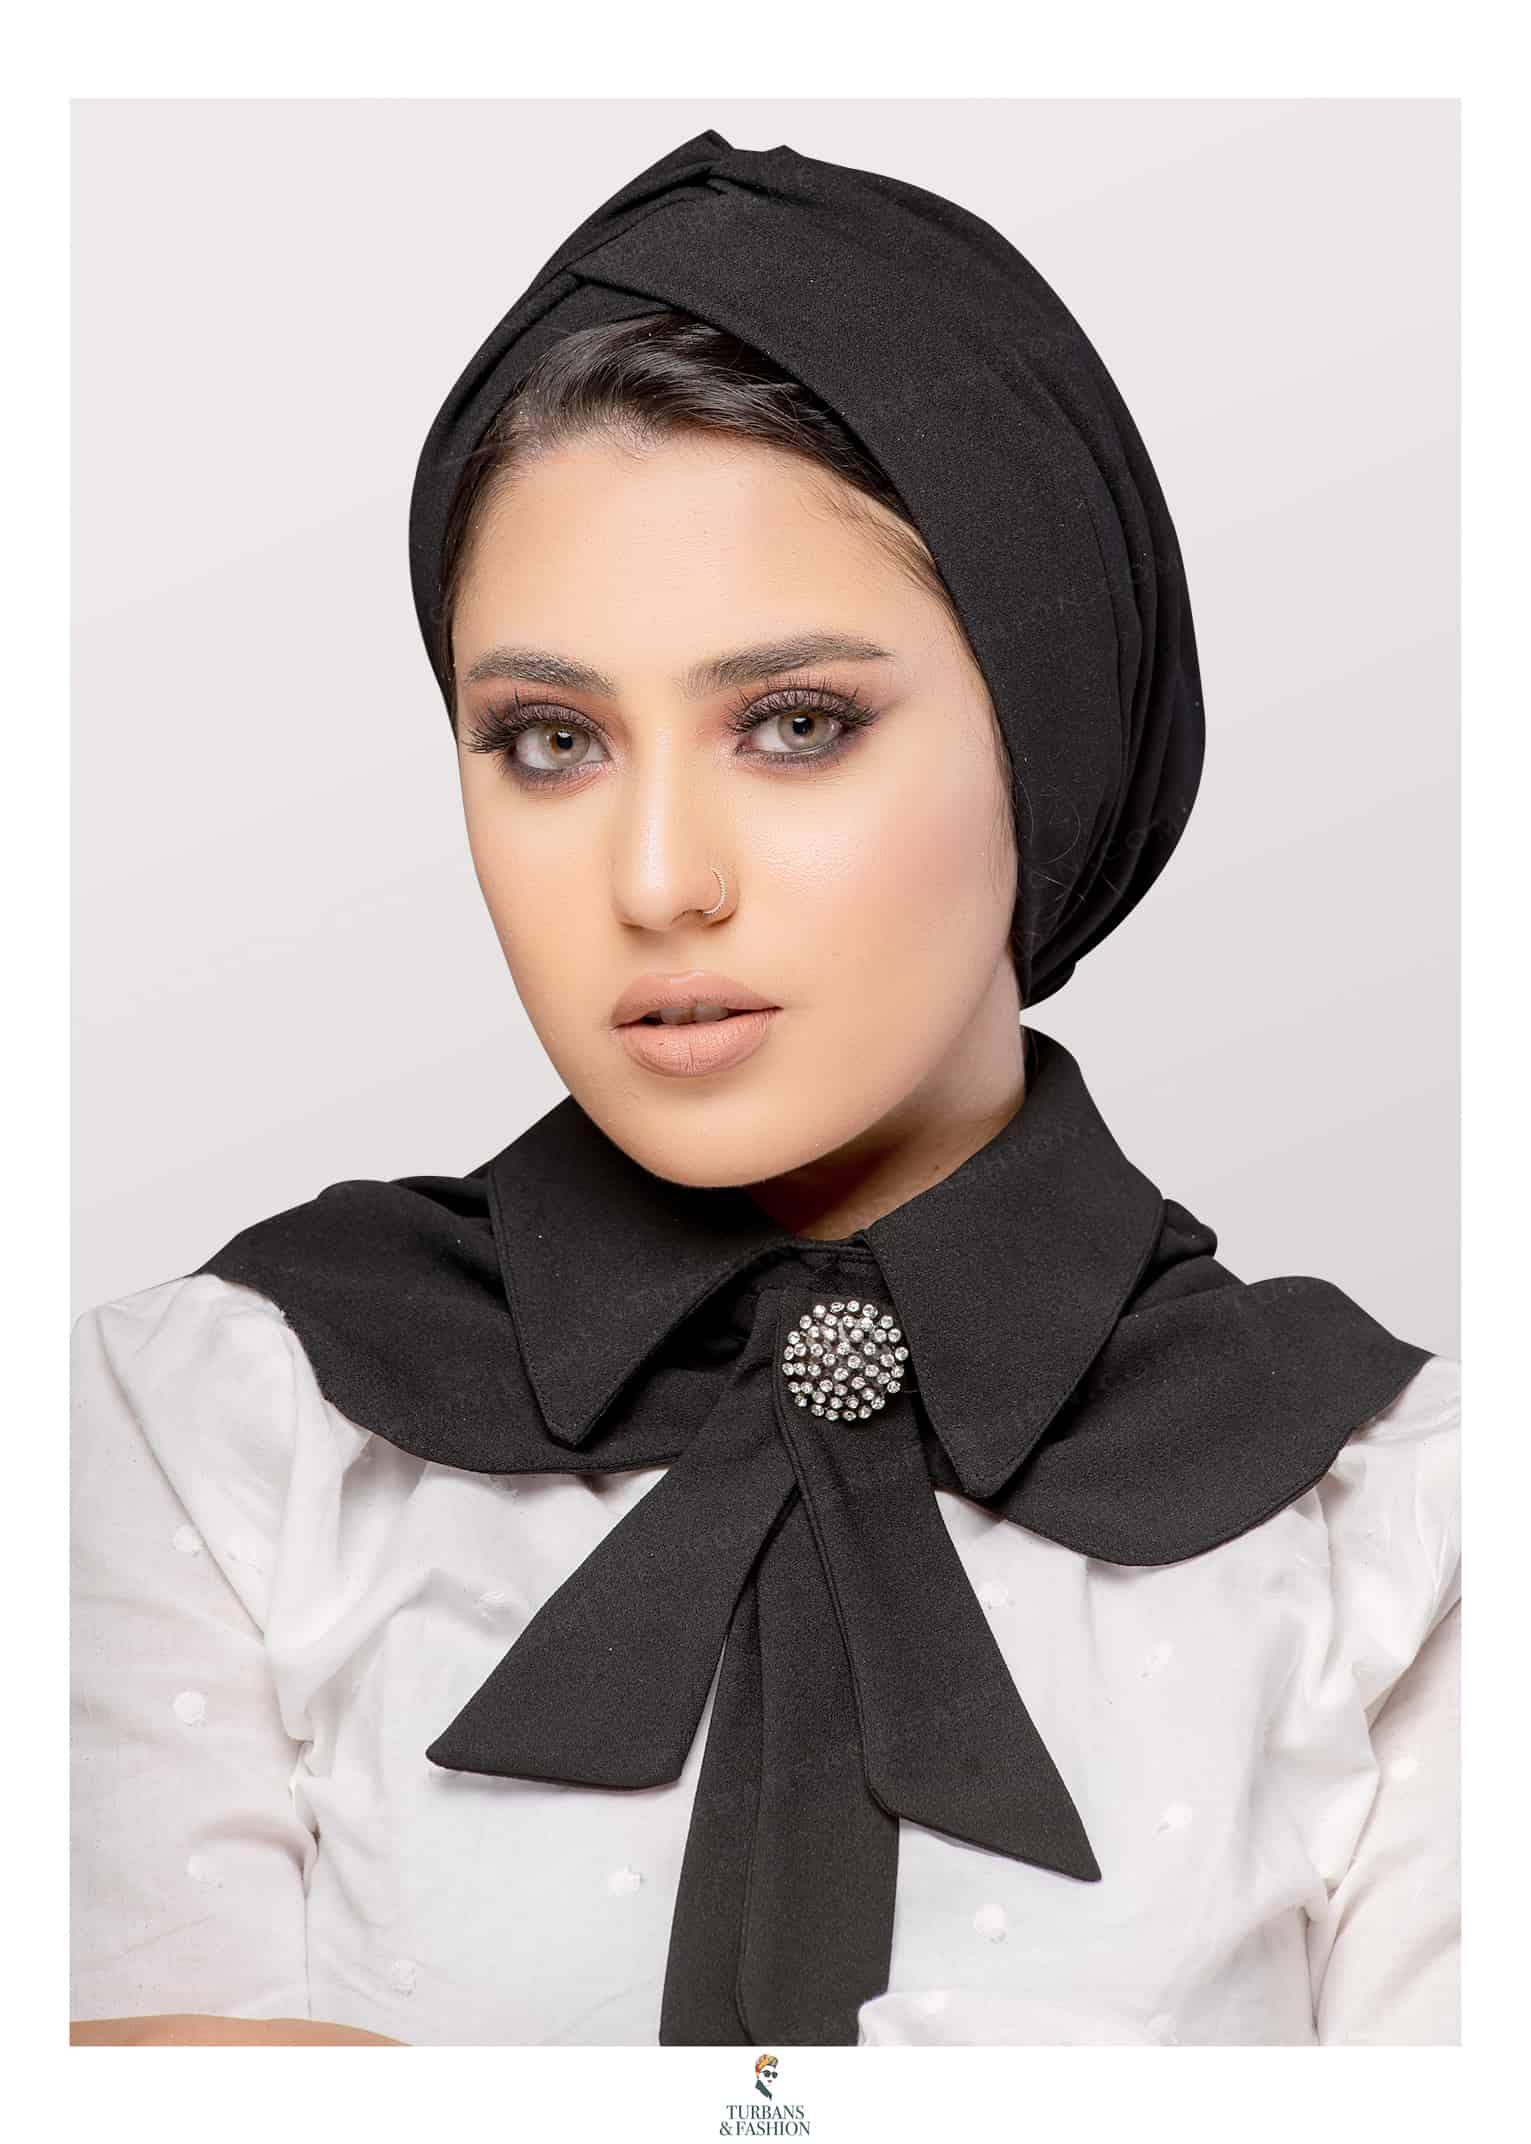 2-Piece Women’s Cross Turban Cap with Collar Set in Soft Crepe Fabric Modest Fashion